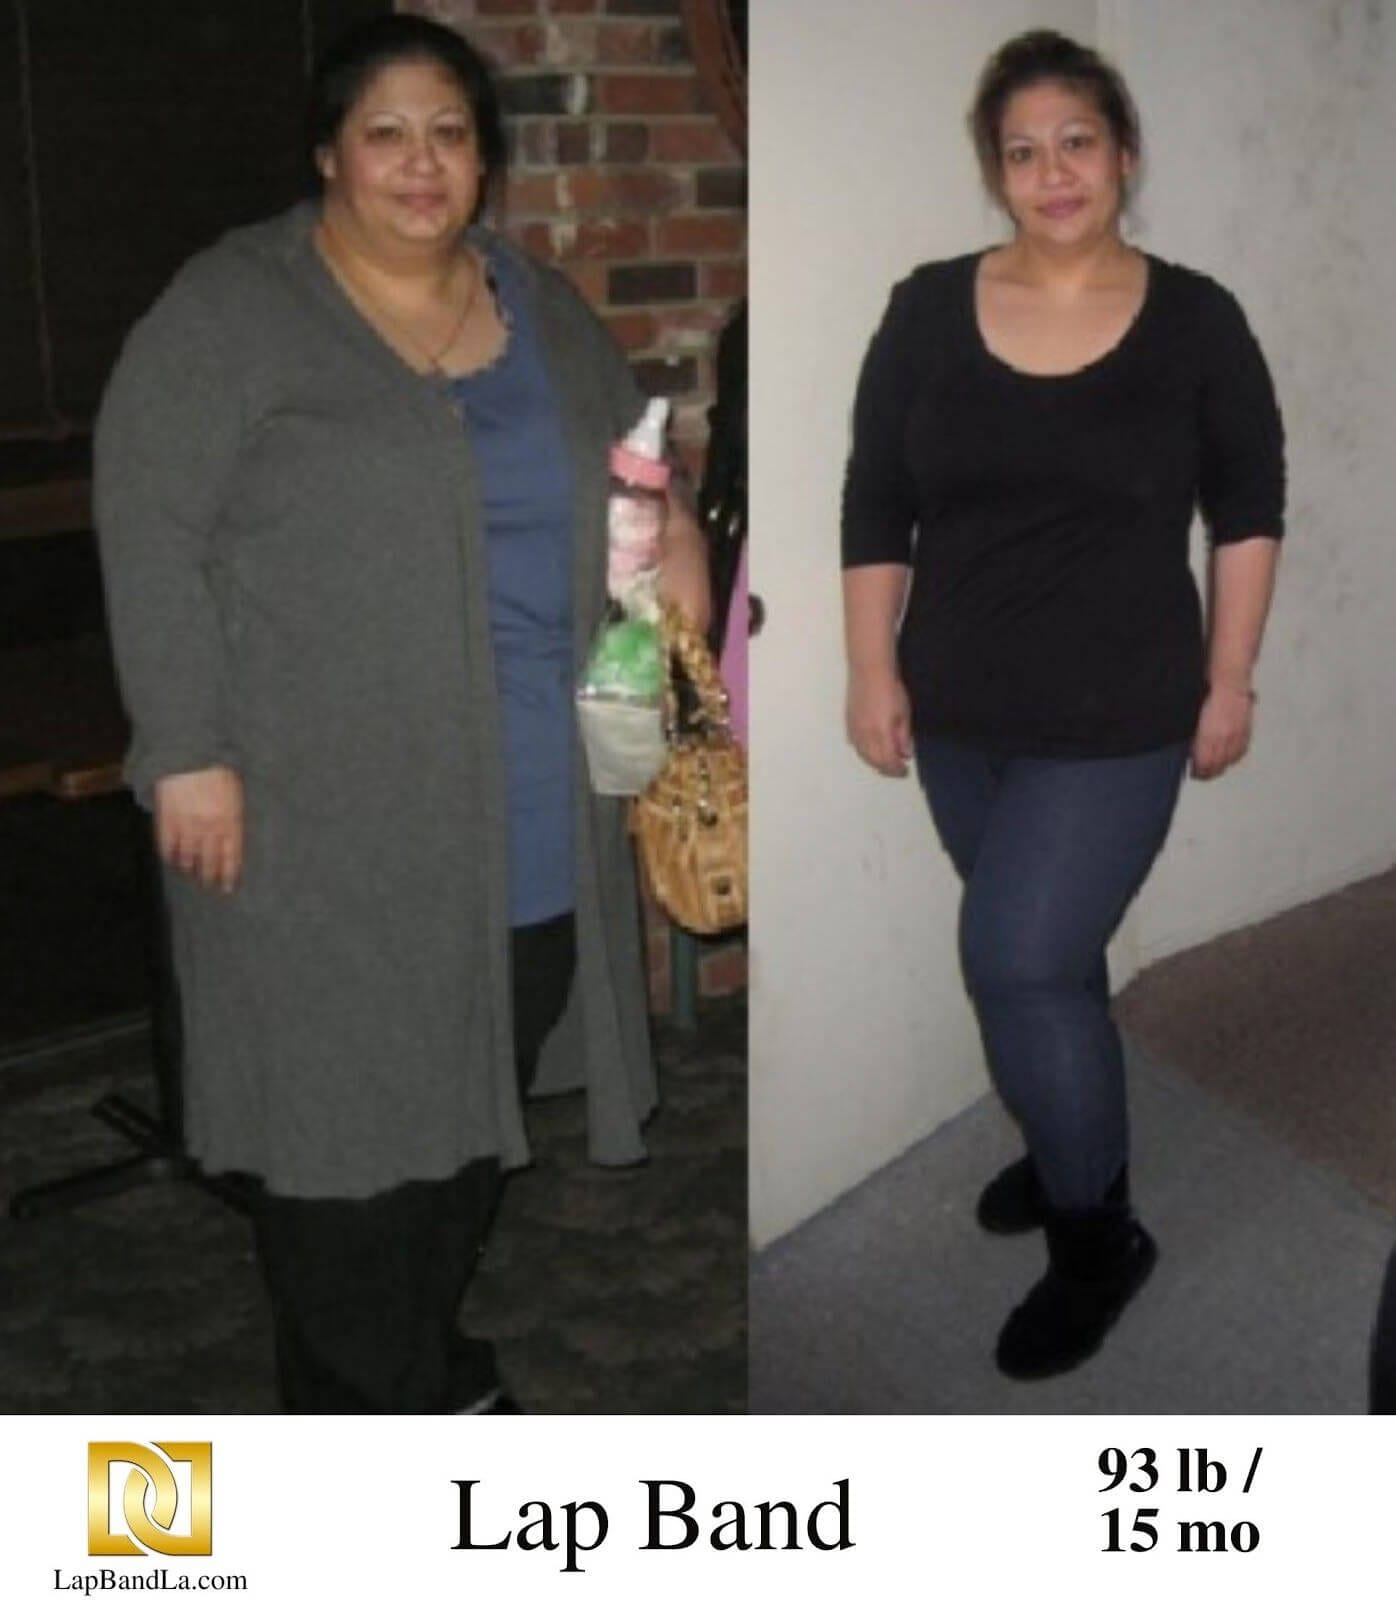 Anita S. Before and after Bariatric Surgery in The Weight Loss Surgery Center Of LA